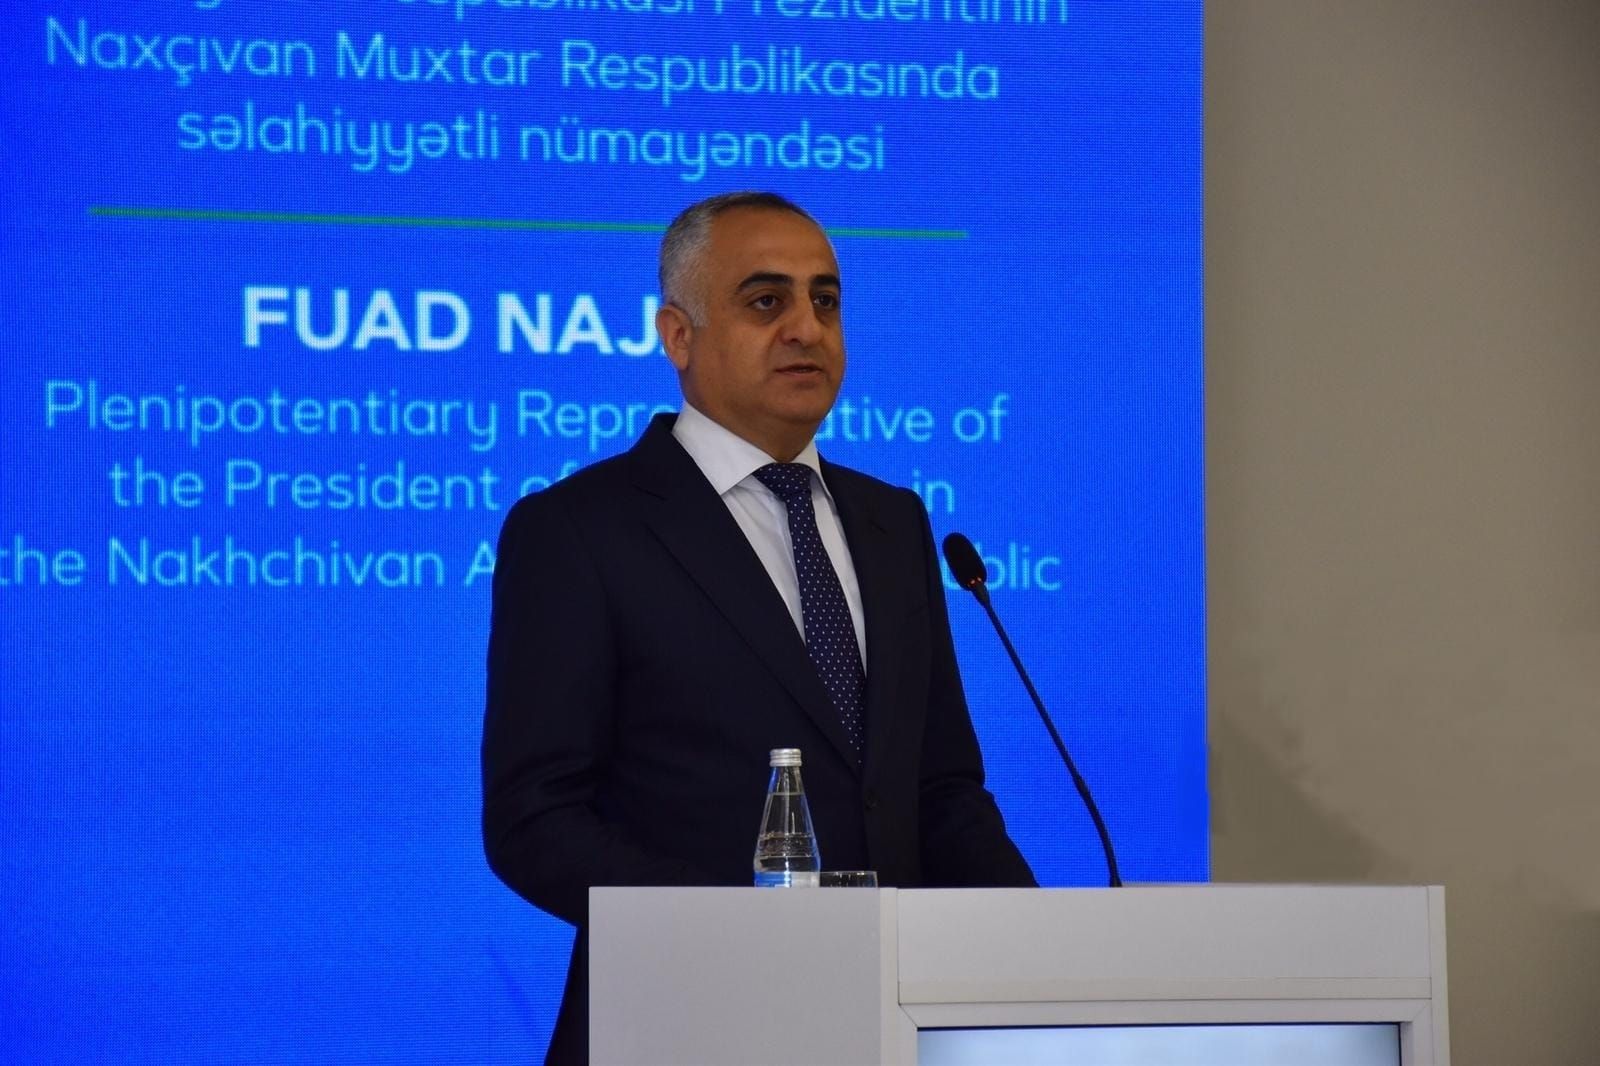 Special session held on "Green Energy Potential of Nakhchivan and East Zangazur"